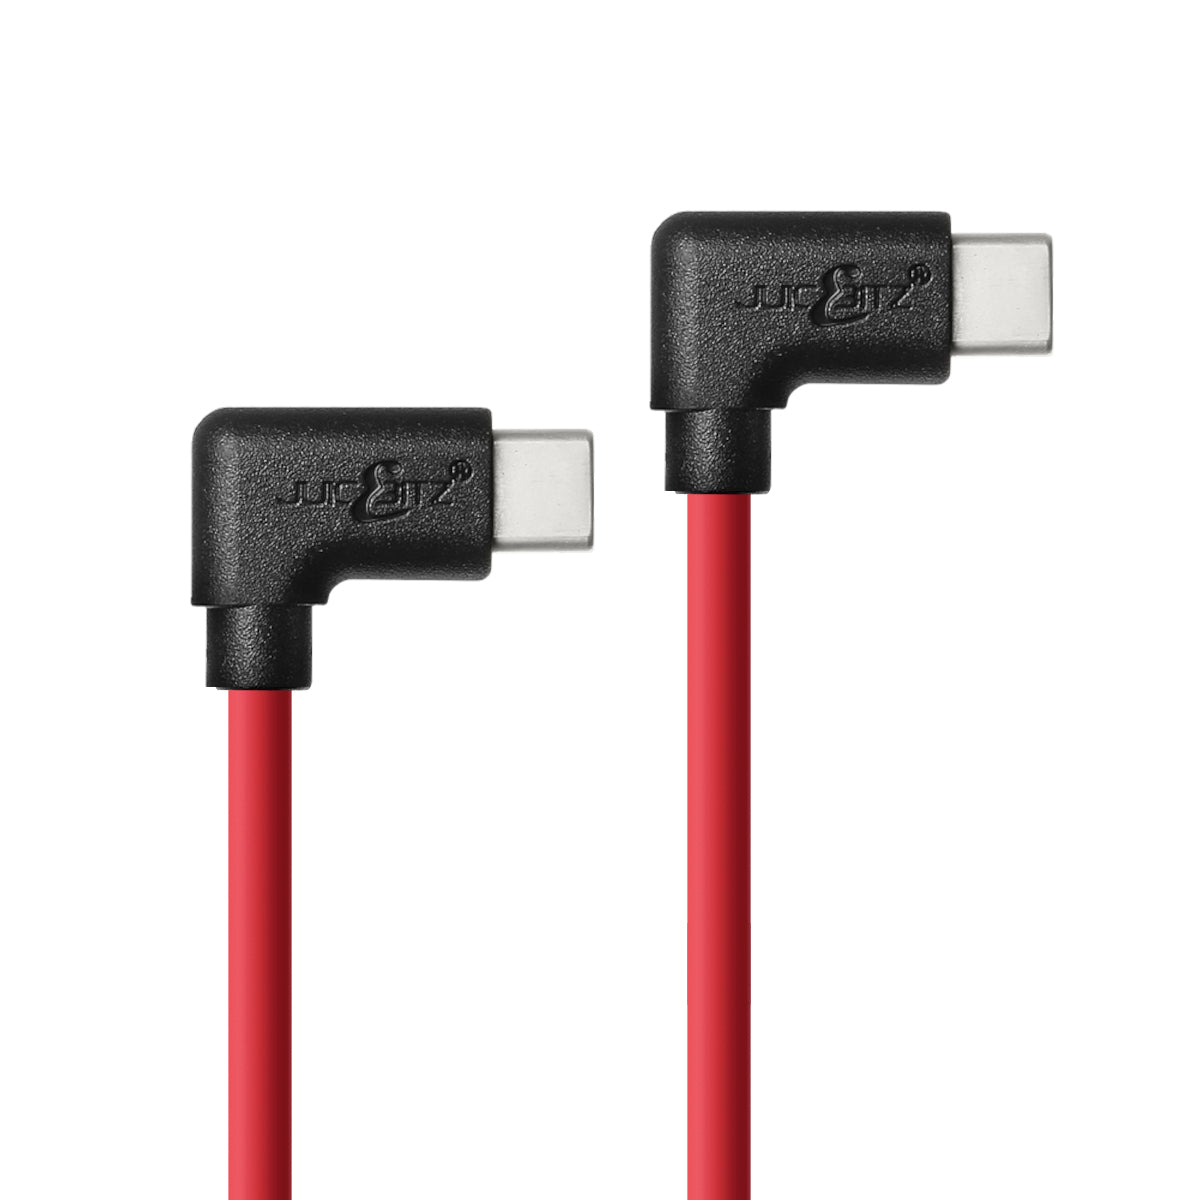 USB-C to USB-C Angled 3A Charger Cable USB 2.0 Data Transfer Lead - Red